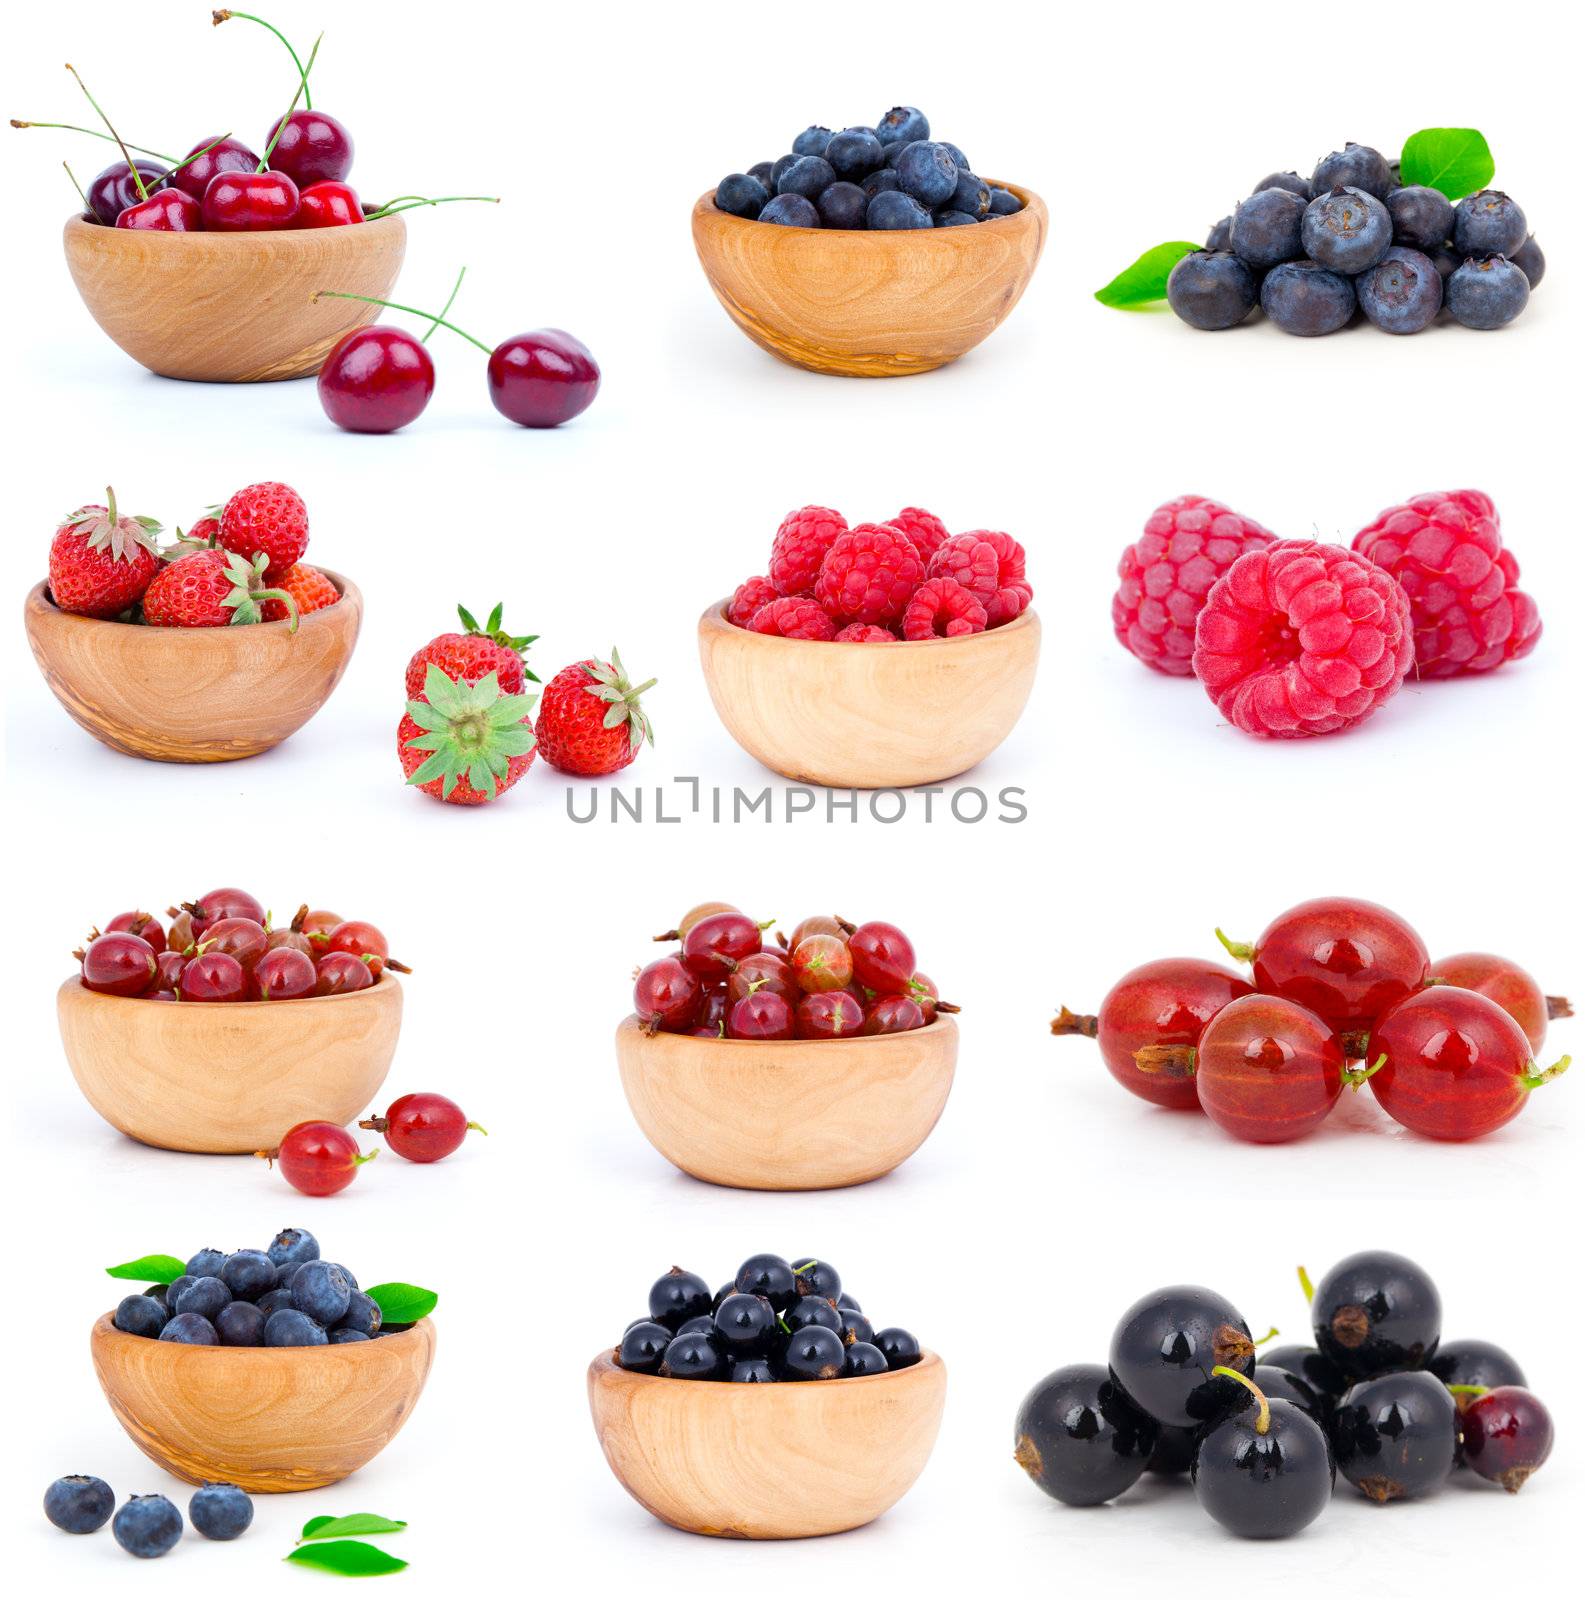 set of fresh strawberry, Blueberries, Raspberries, cherry, gooseberries and blackcurrants in a wooden bowl, over a white background. by motorolka